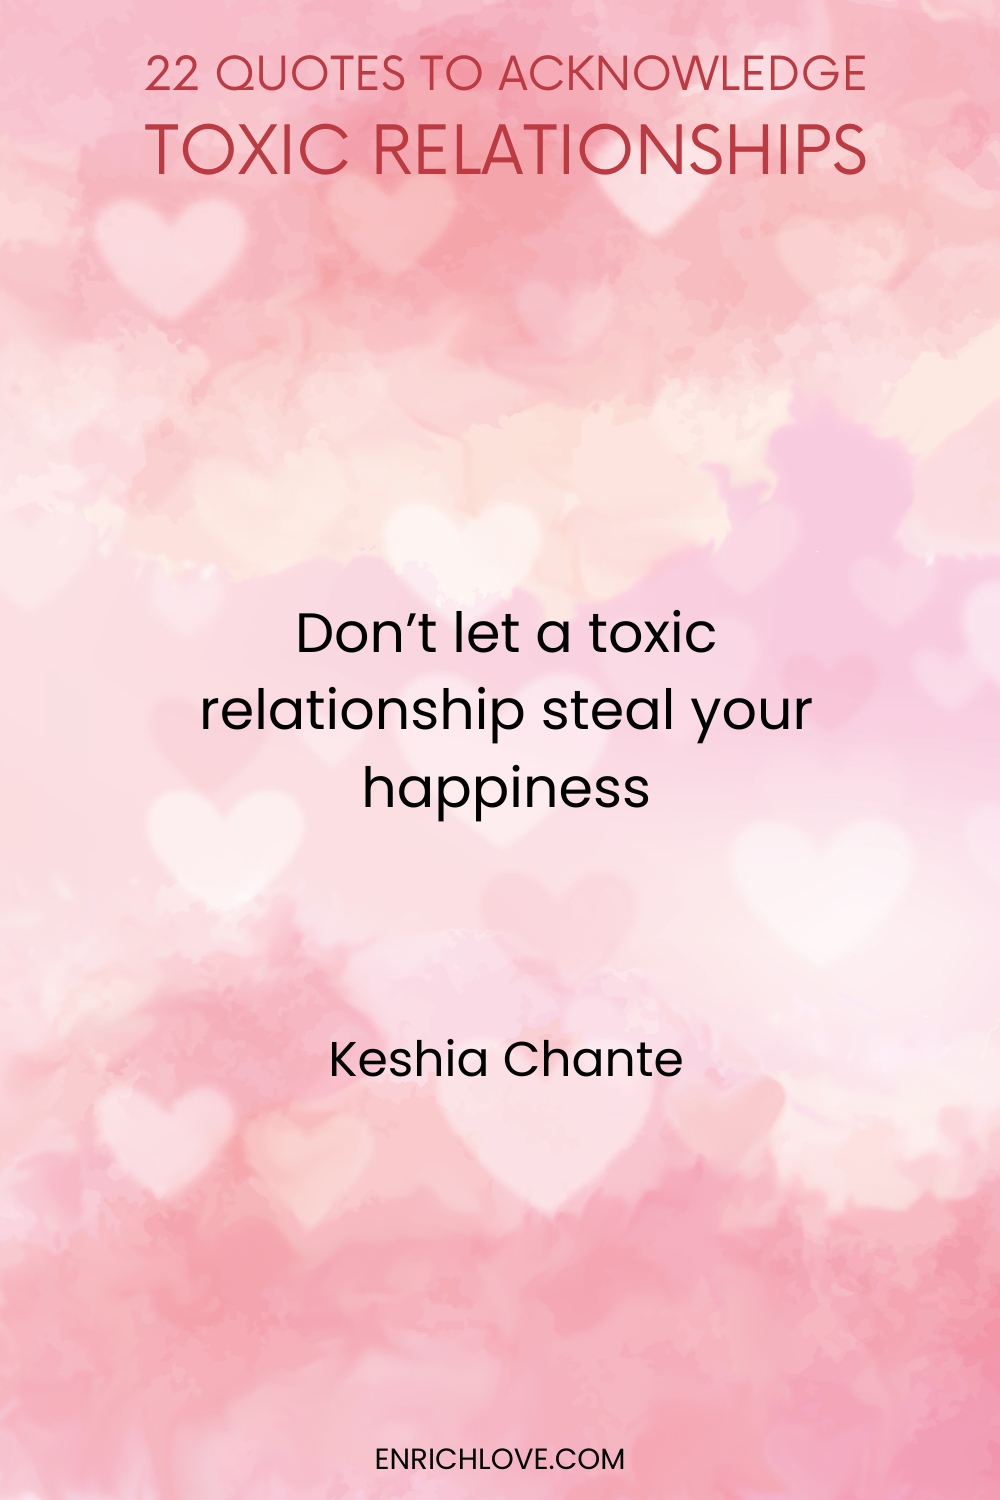 22 Quotes to Acknowledge Toxic Relationships -Don't let a toxic relationship steal your happiness by Keshia Chante